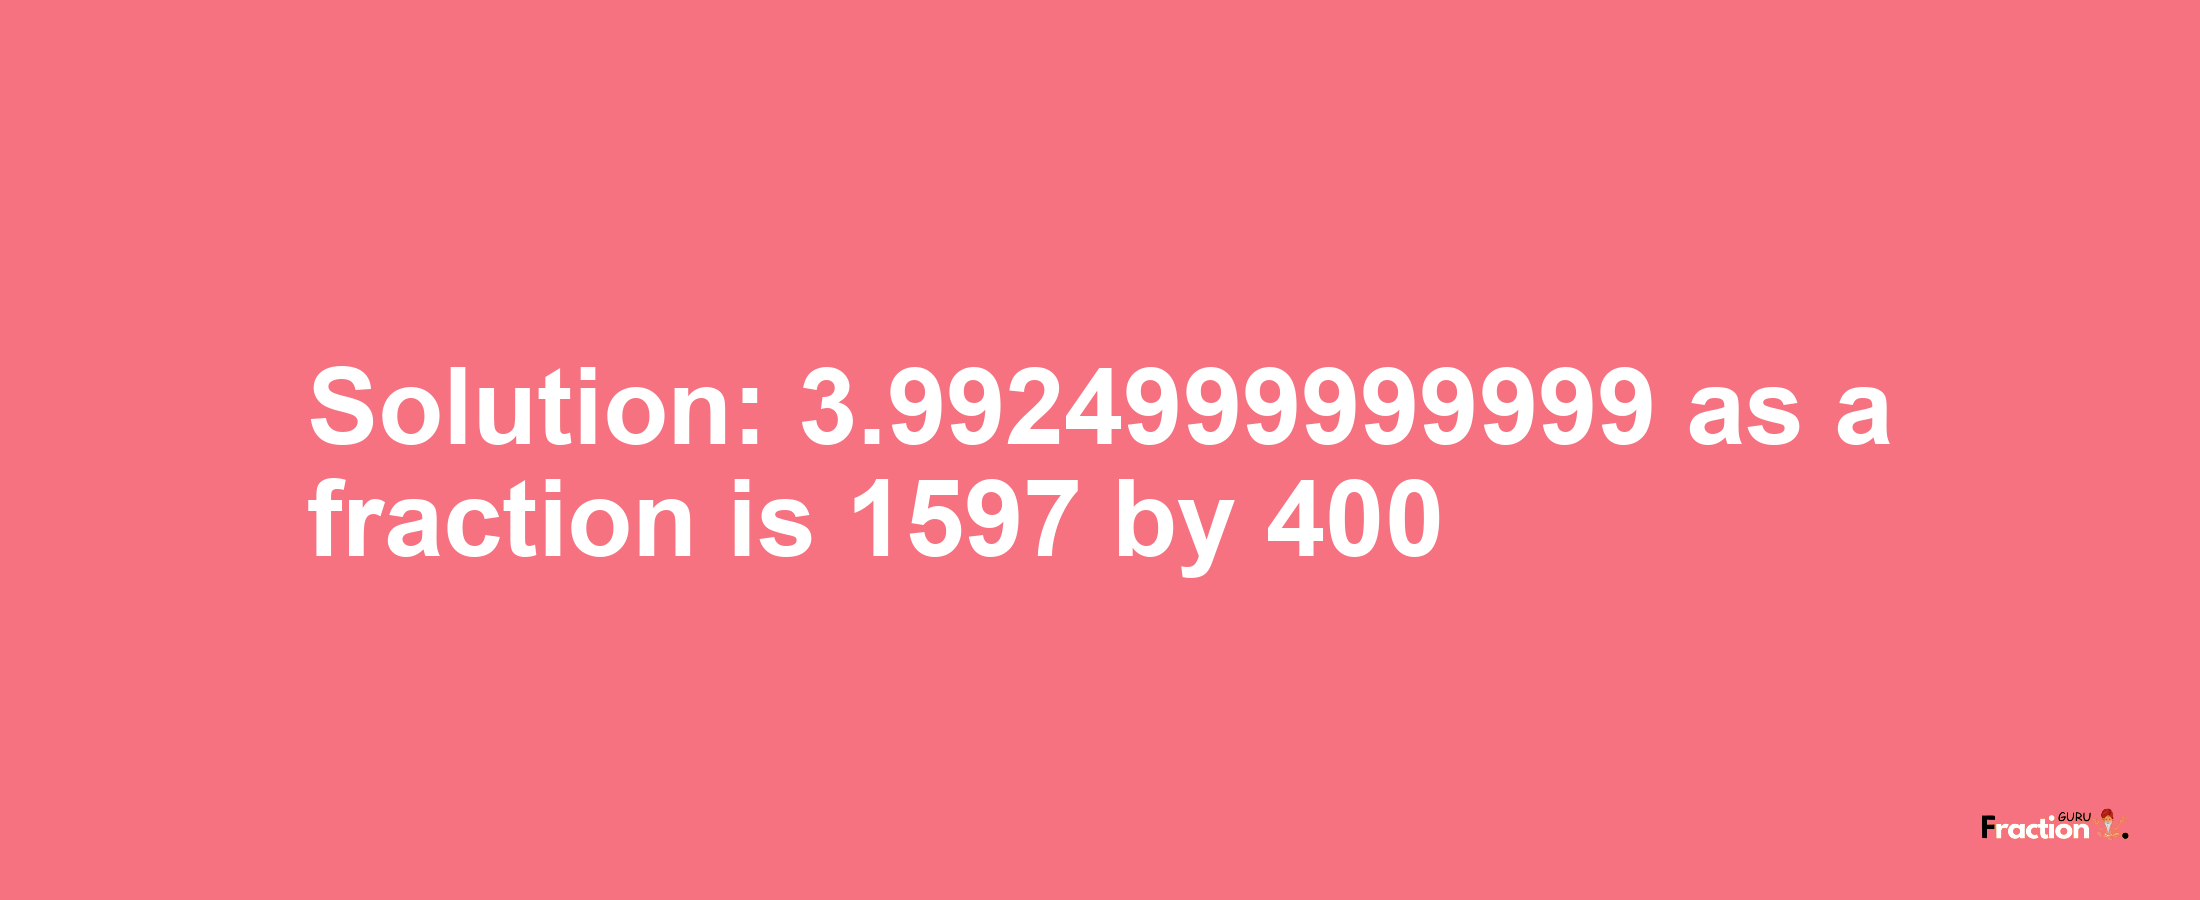 Solution:3.9924999999999 as a fraction is 1597/400